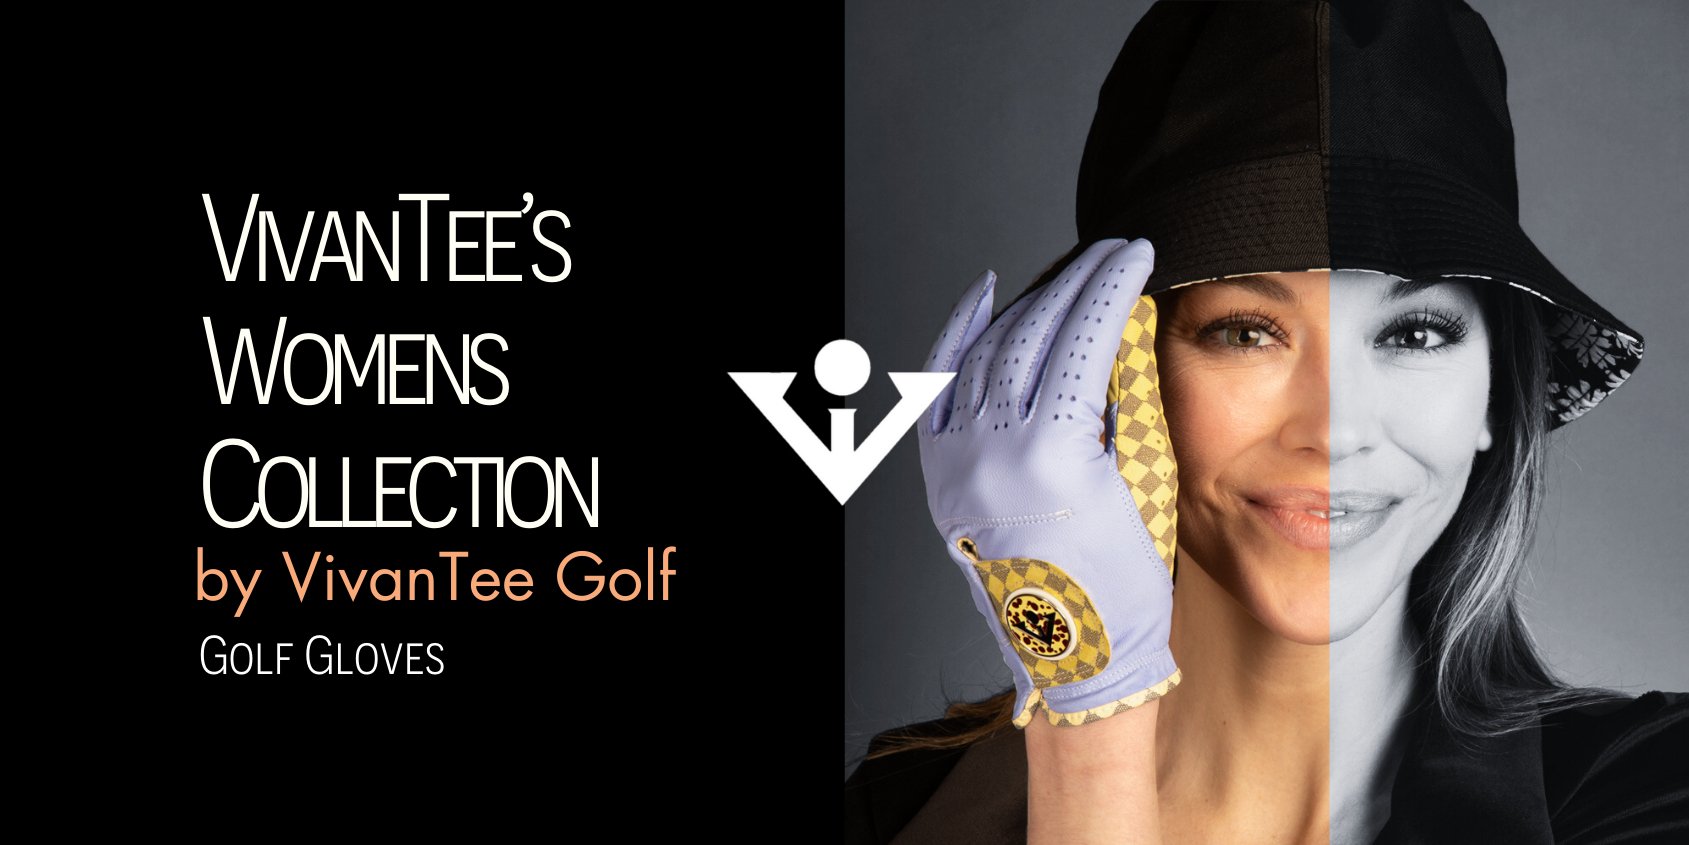 A playful woman in a stylish black hat poses with a VivanTee golf ball and a white and pink colored golf glove for women, VivanTee's Women's Collection, showcasing unique design and flair for the fashion-conscious woman golfer.